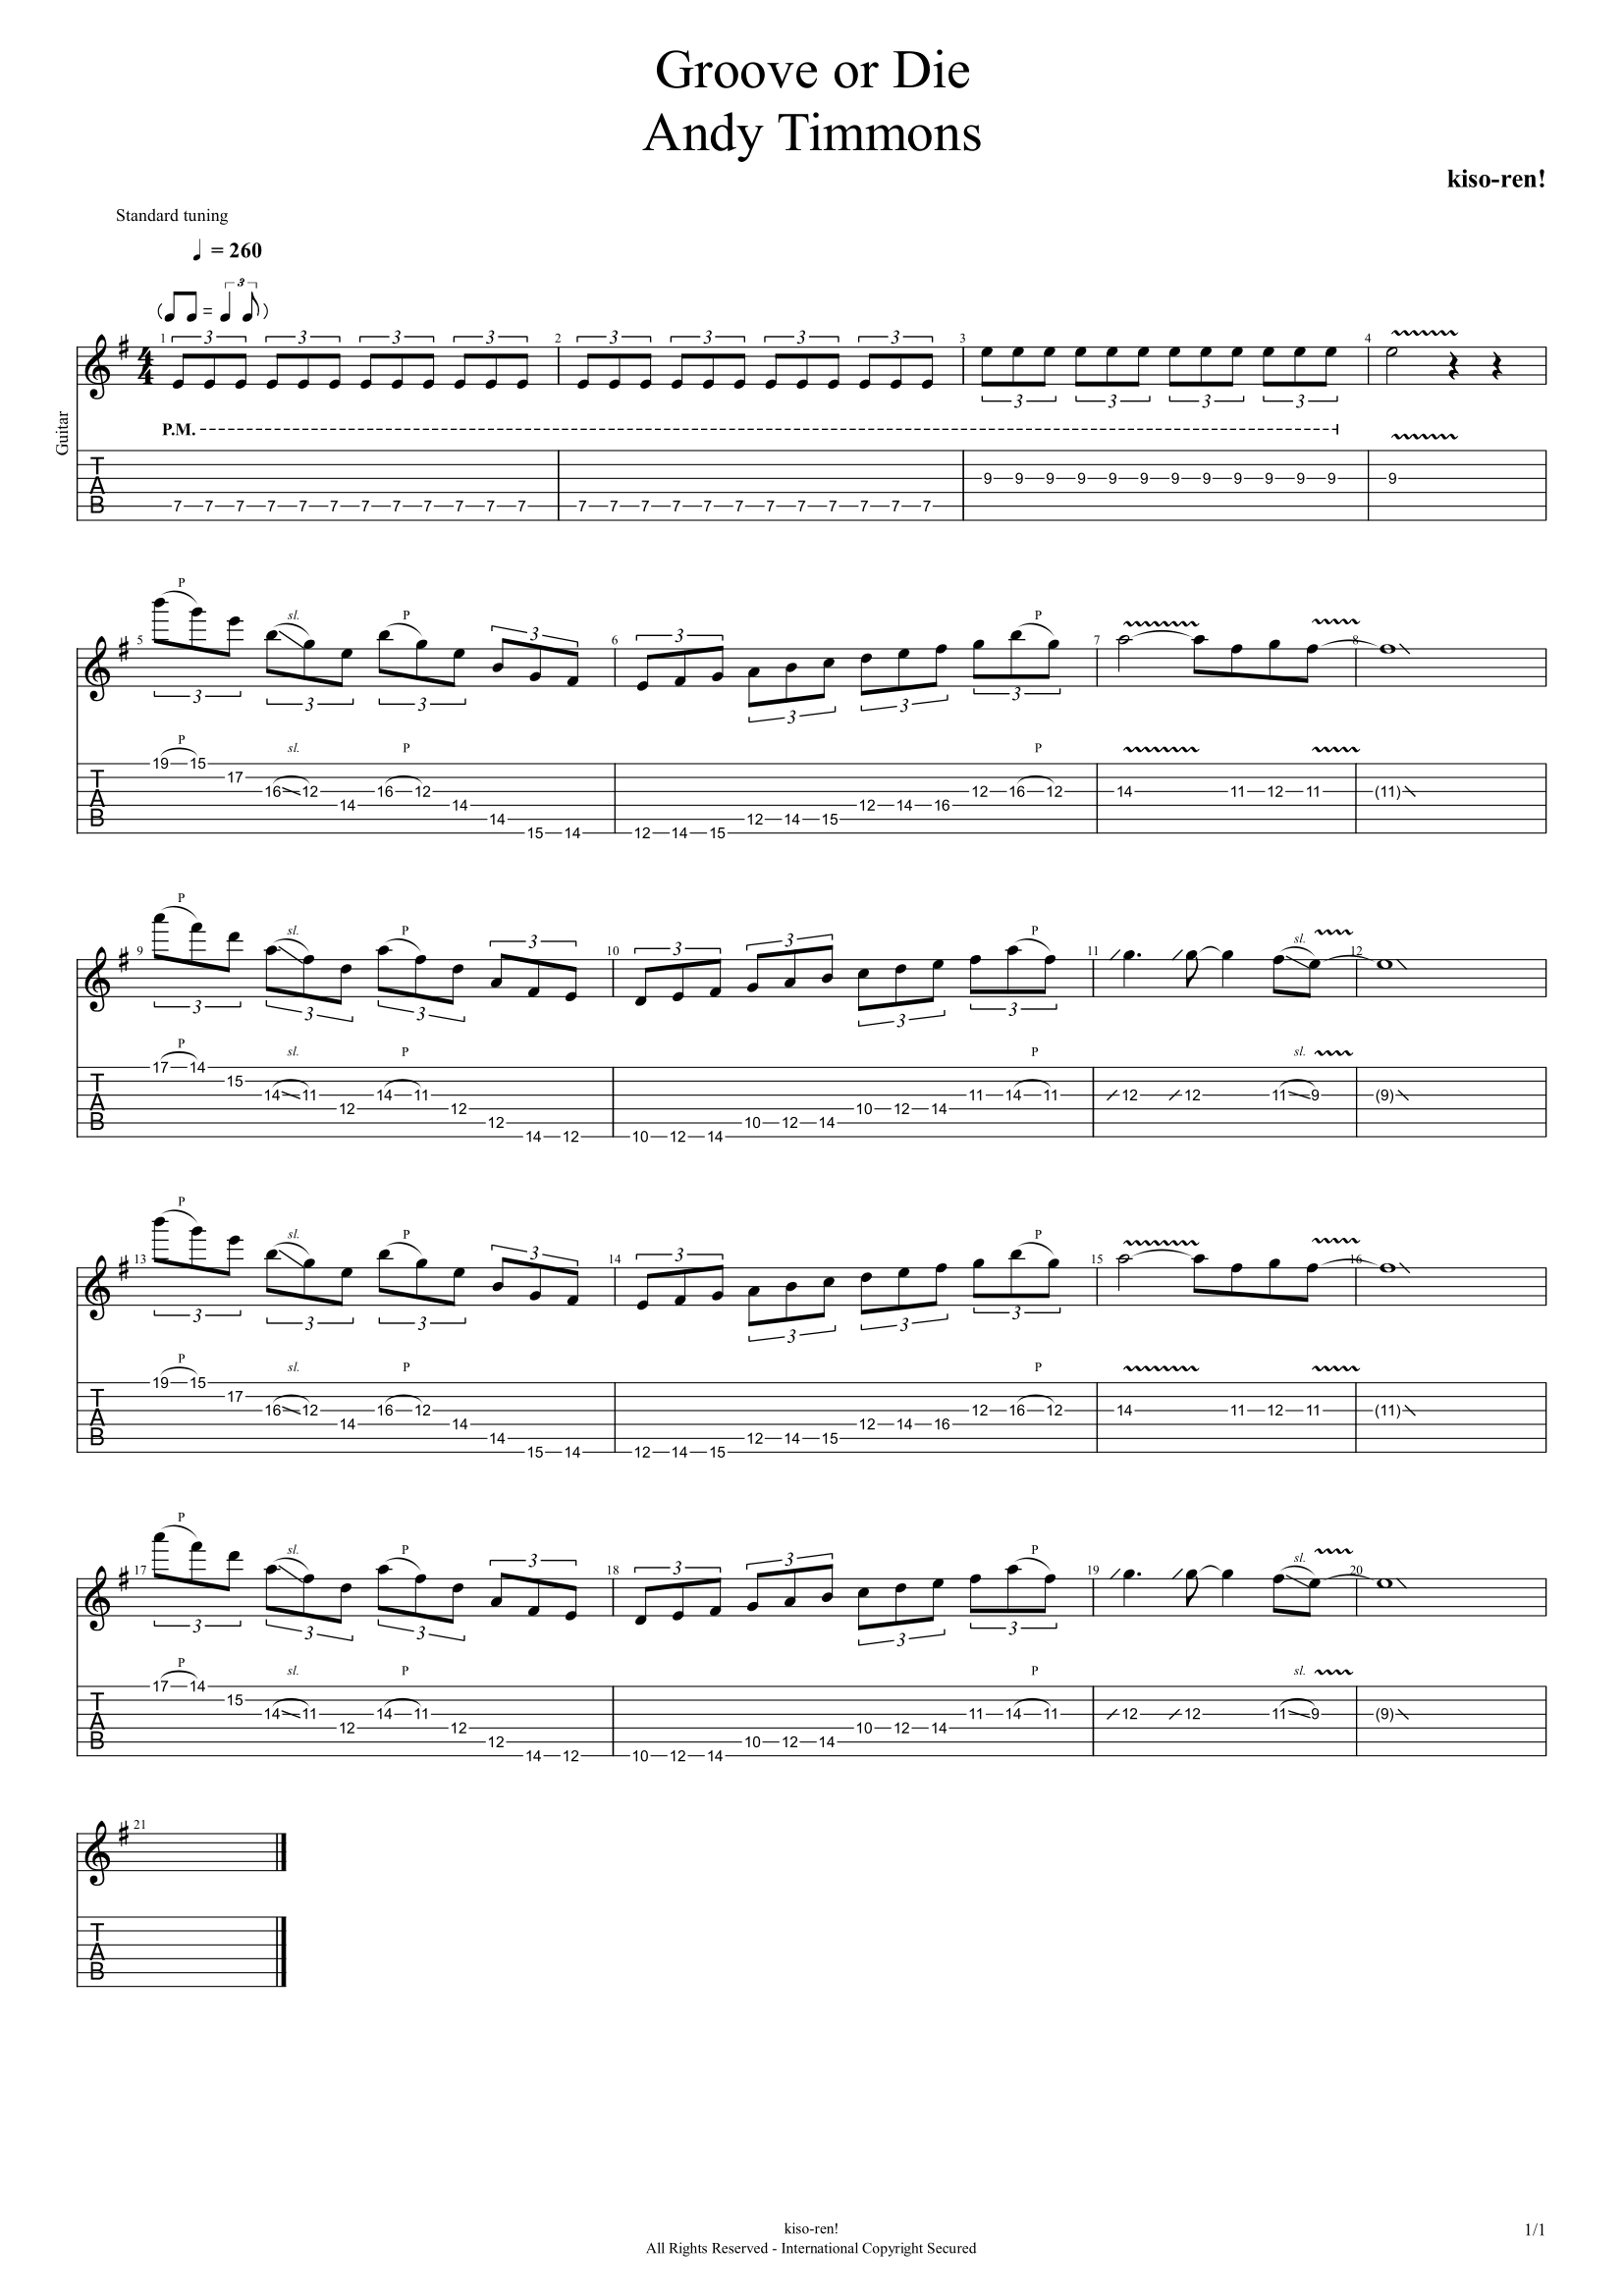 【TAB】Groove Or Die / Andy Timmons Practice アンディ･ティモンズ グルーブオアダイ ピッキング練習【Guitar Picking Vol.36】